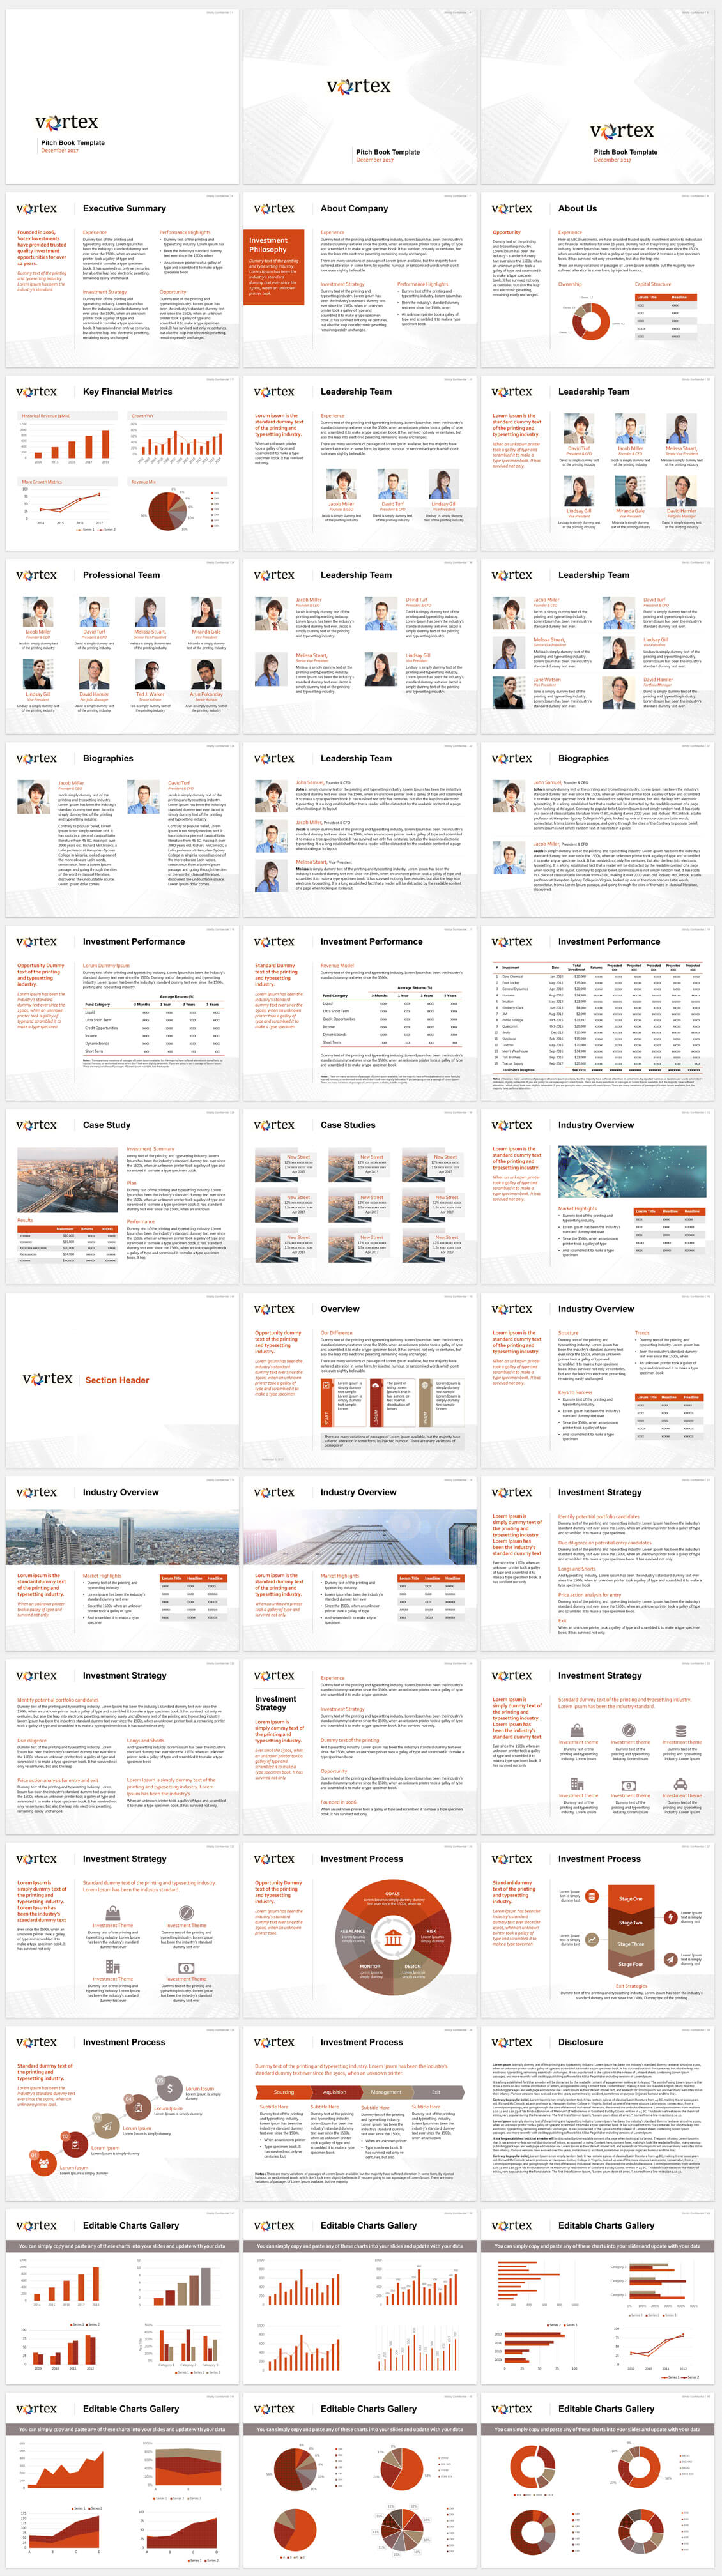 Pitch Book Template Example For Investment Banking Pitch Throughout Powerpoint Pitch Book Template